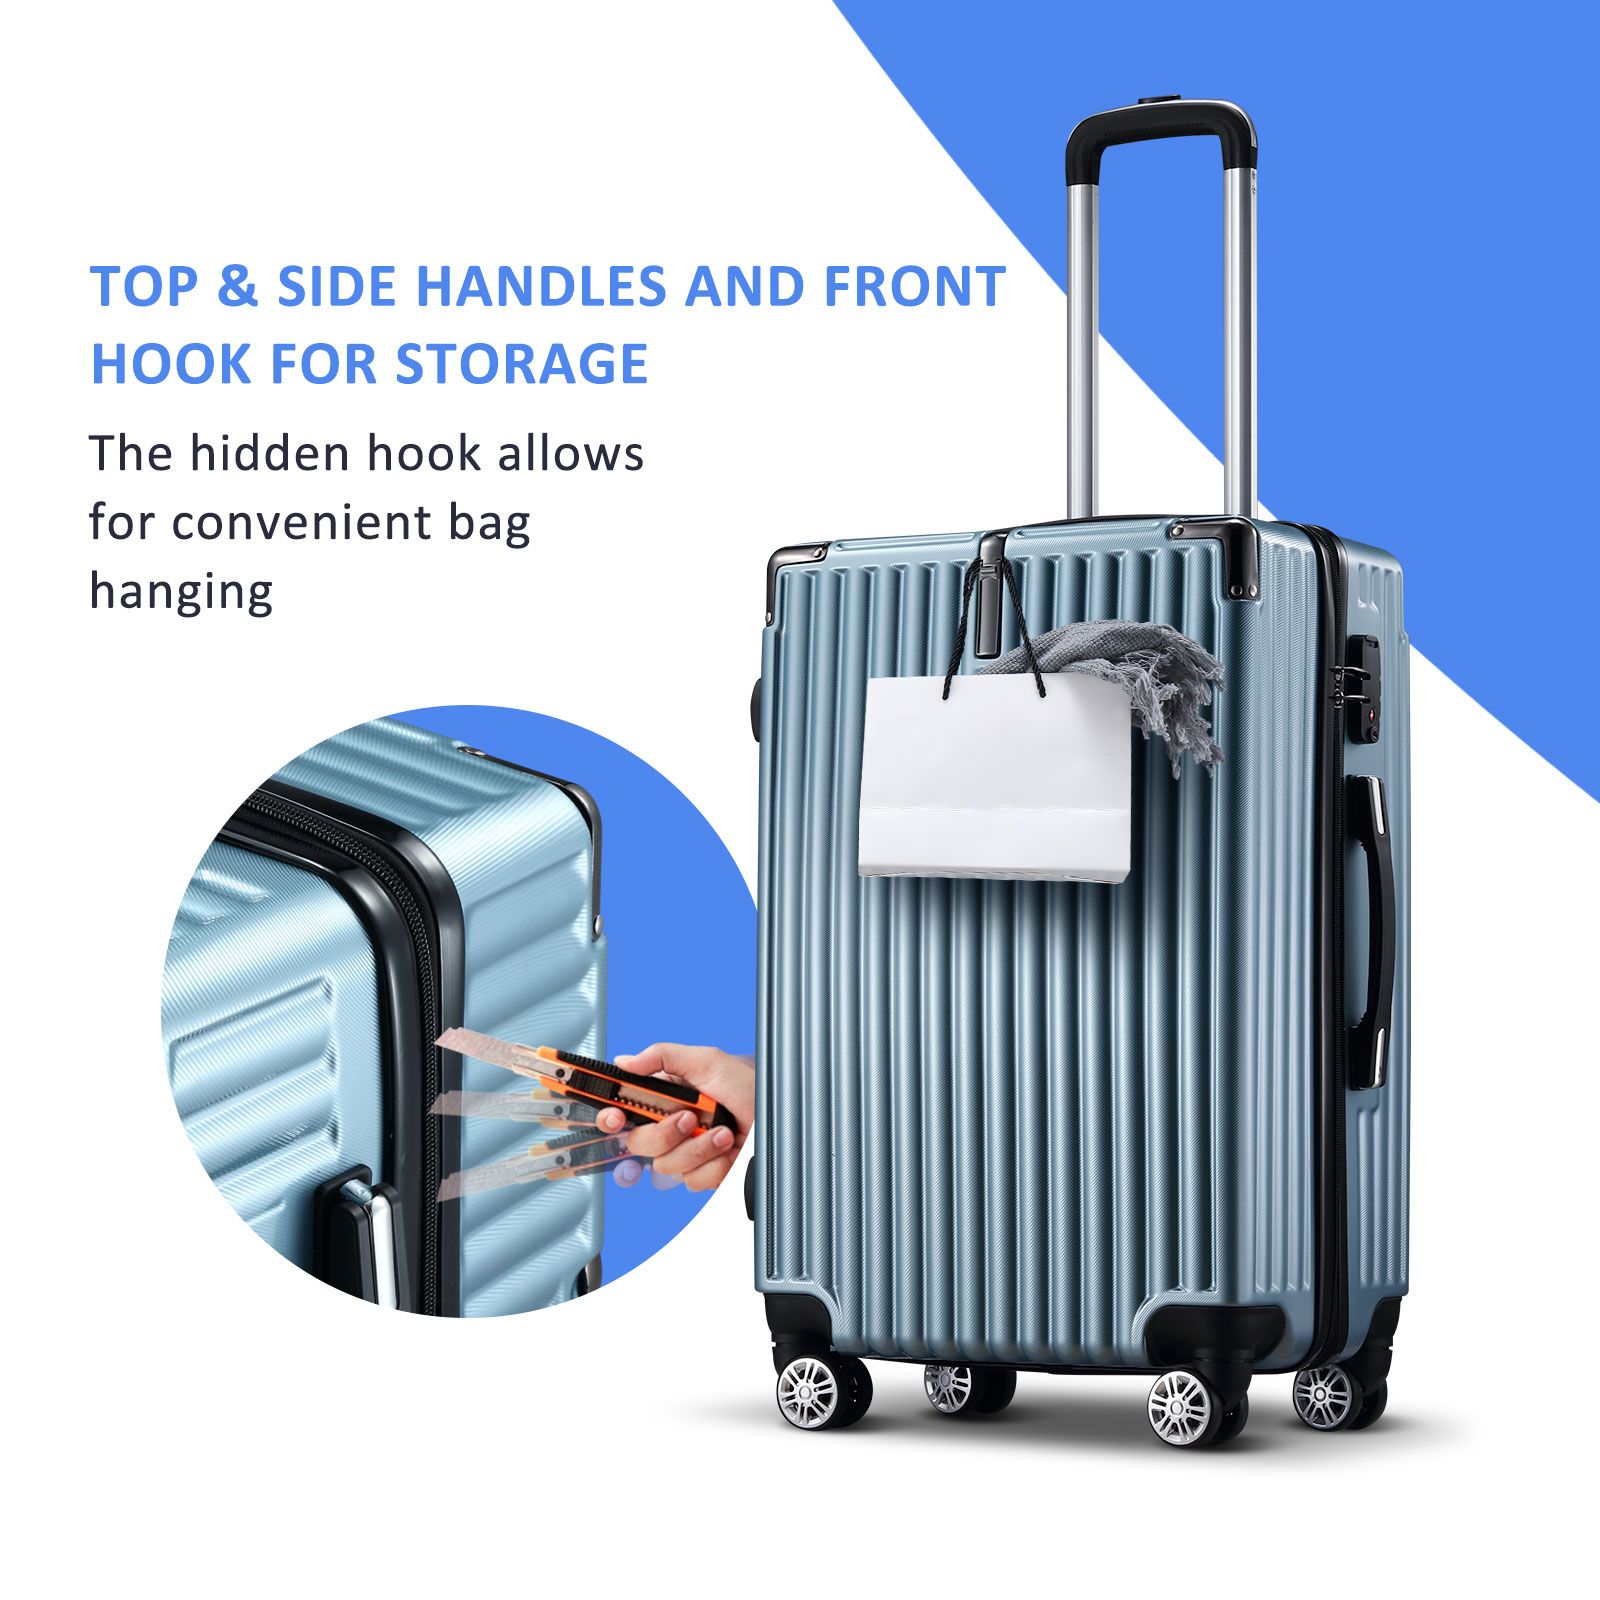 2 PCS Luggage Set Suitcases Carry On Spinner Traveller Bags Cabin Hard Shell Case Trolley Lightweight Travel Storage Rolling TSA Lock Ice Blue